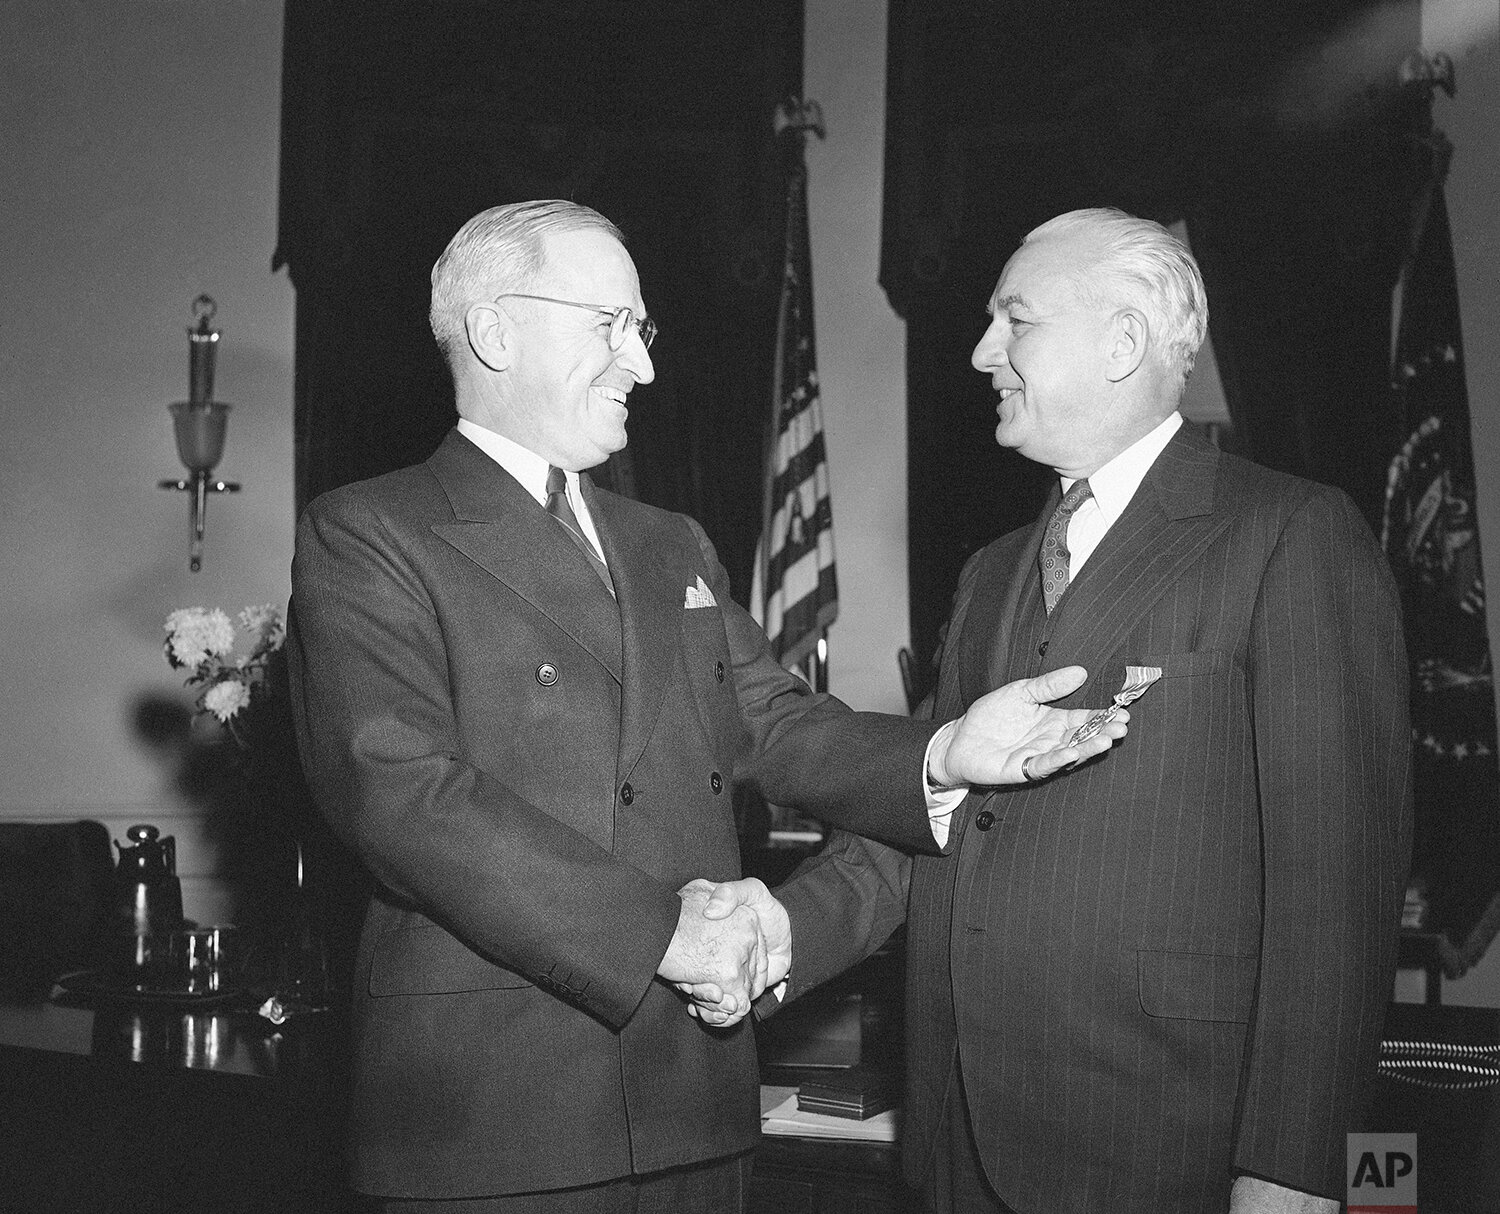  Byron Price, right, wartime chief of censorship, is congratulated by President Harry Truman at the White House in Washington on Jan. 15, 1946 after receiving the Medal of Merit for his services during the war. (AP Photo) 